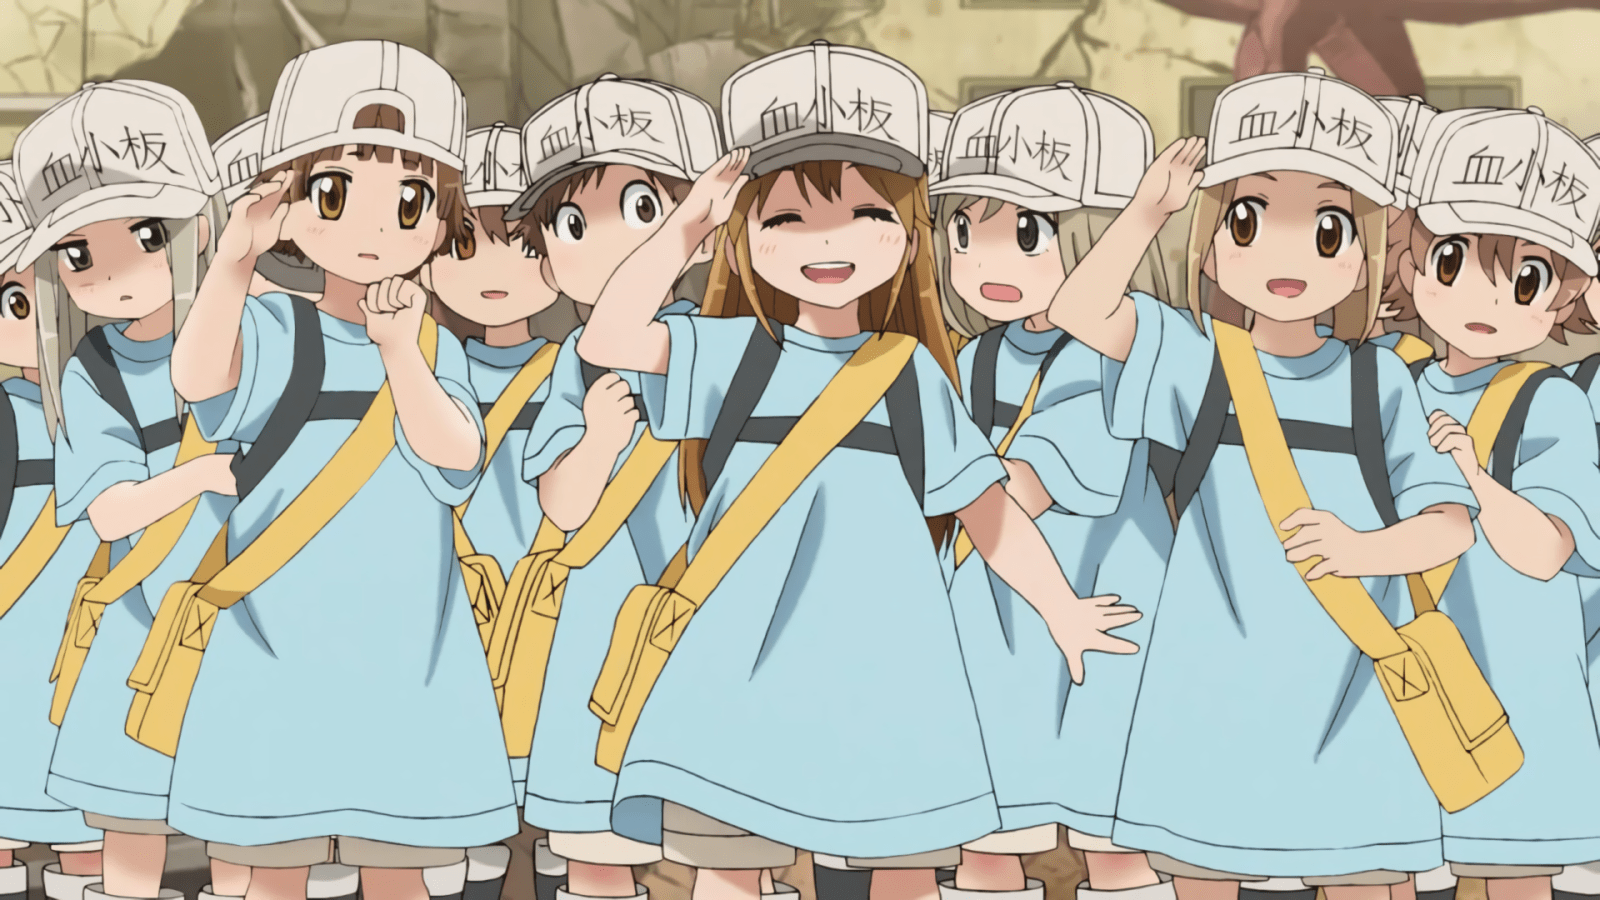 Cells at Work's adorable Platelets.